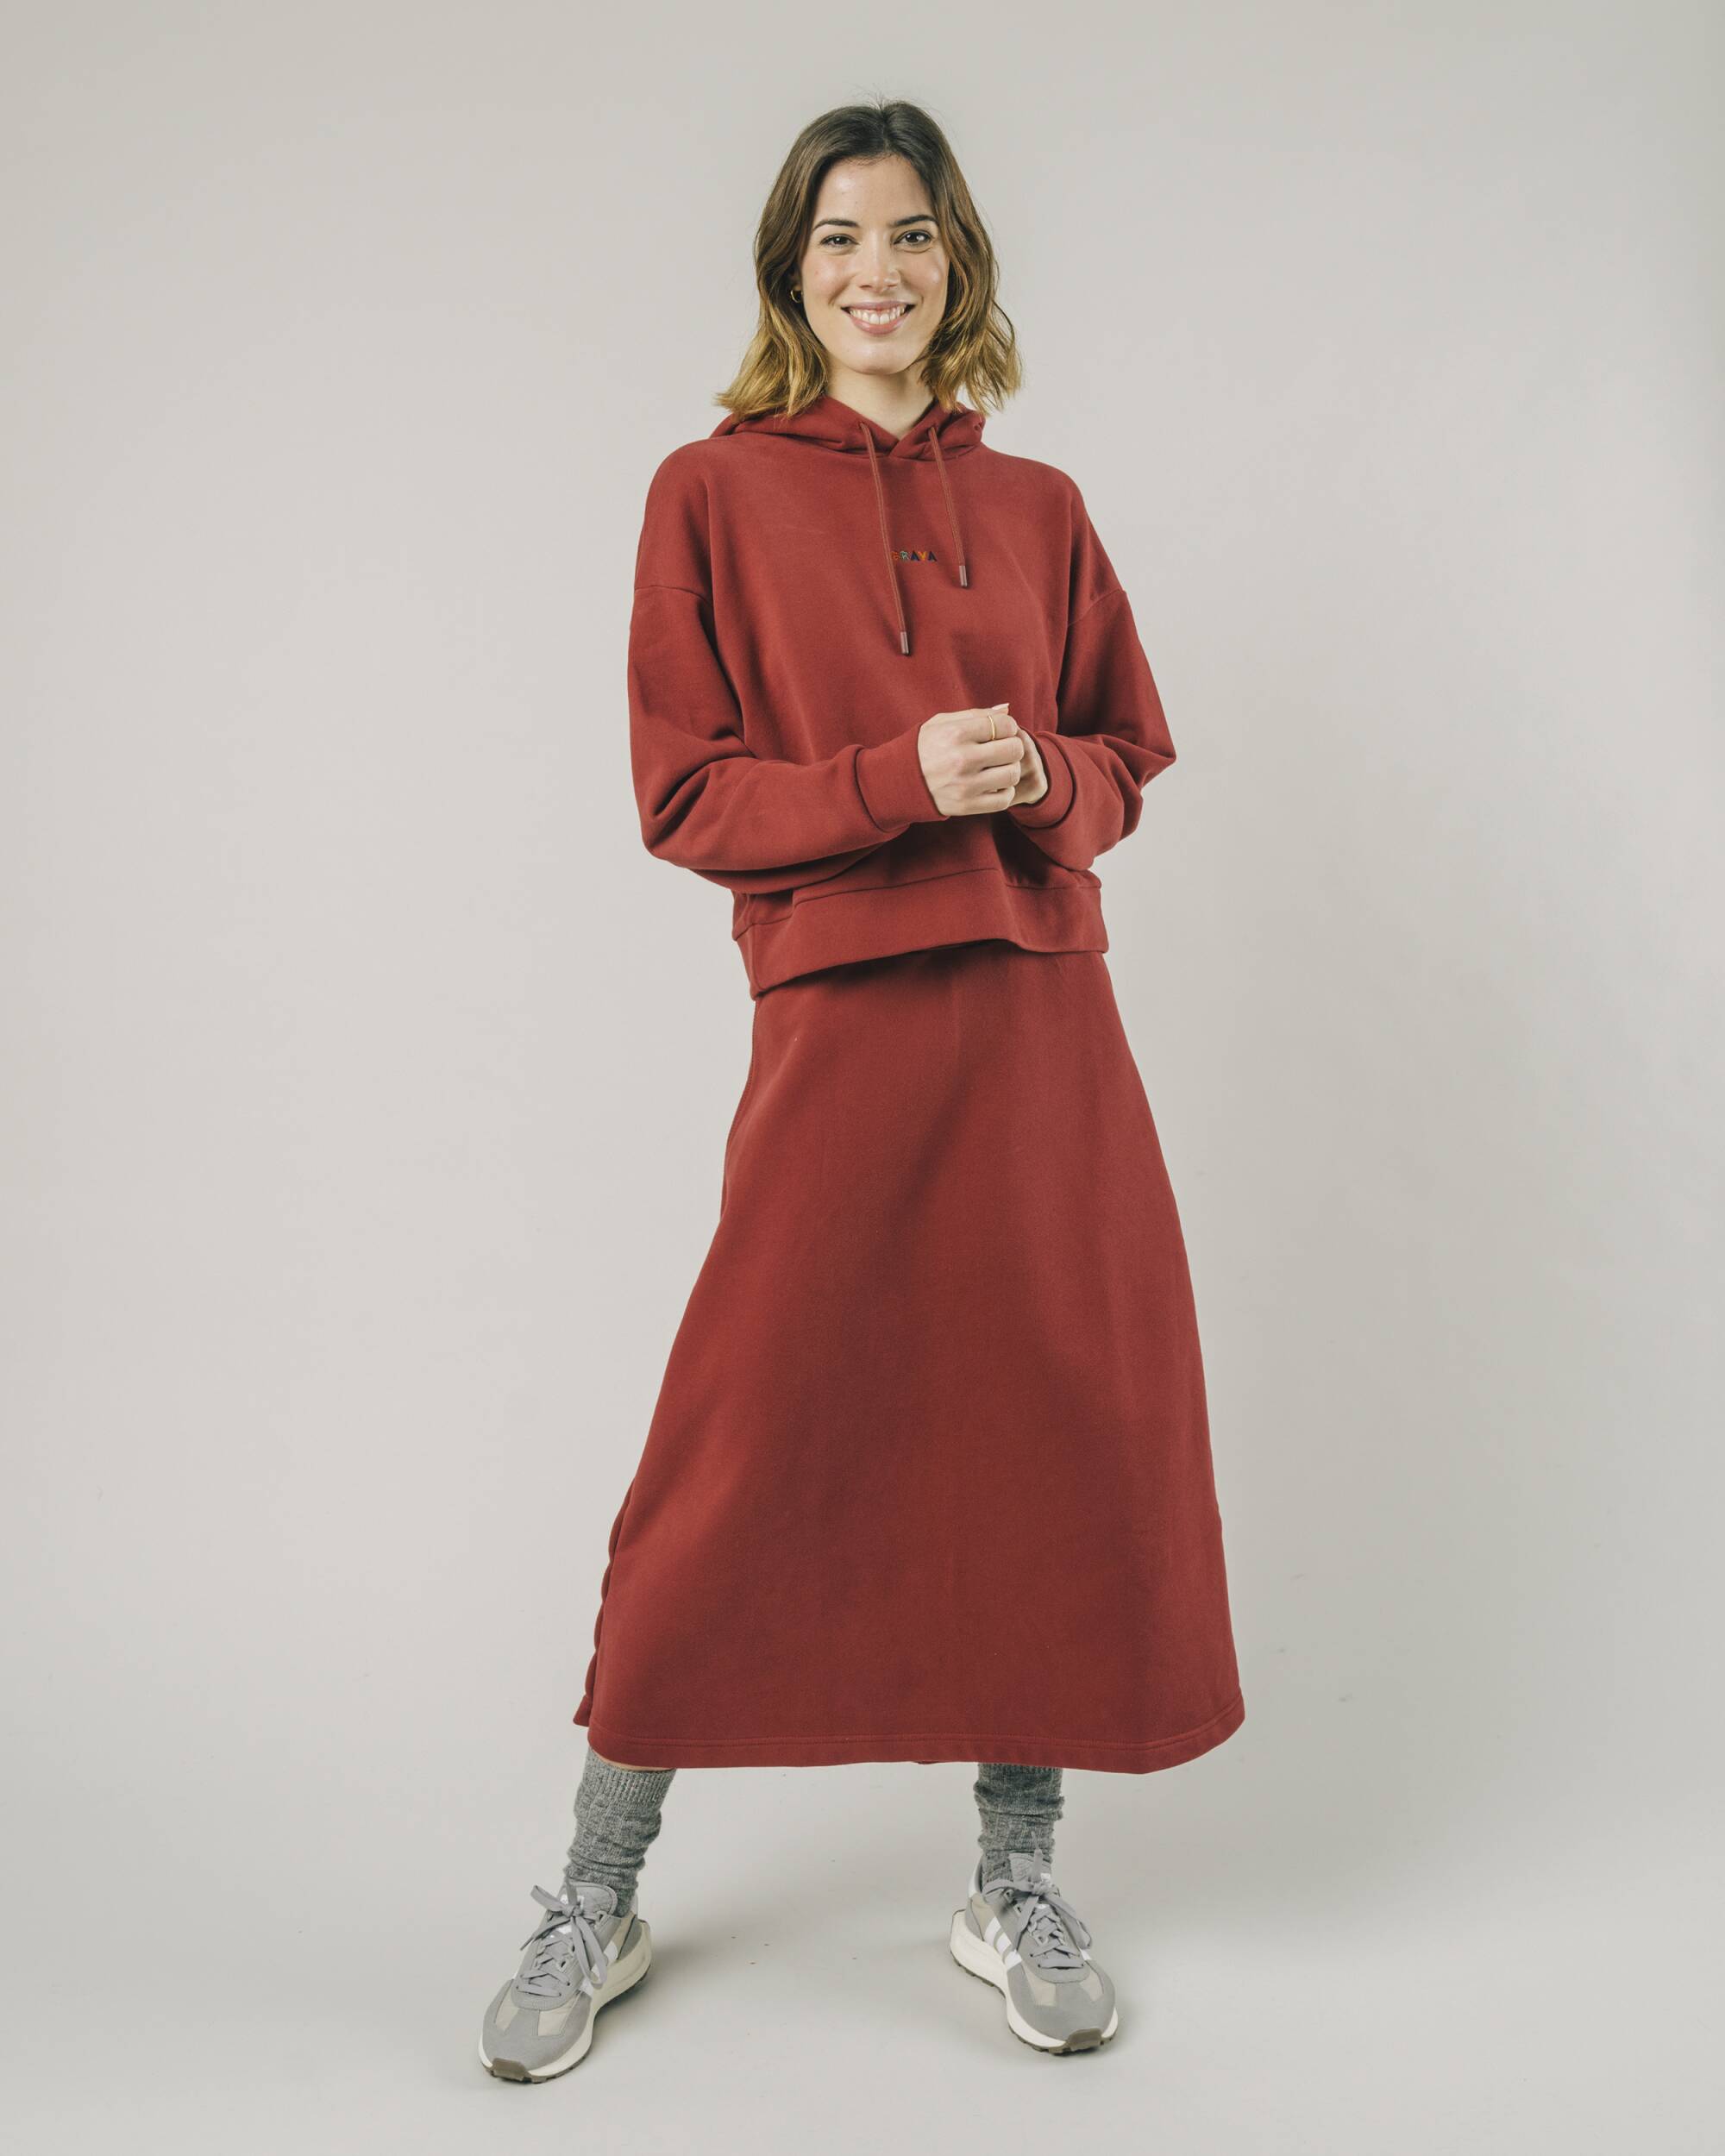 Red cropped sweater made of organic cotton from Brava Fabrics